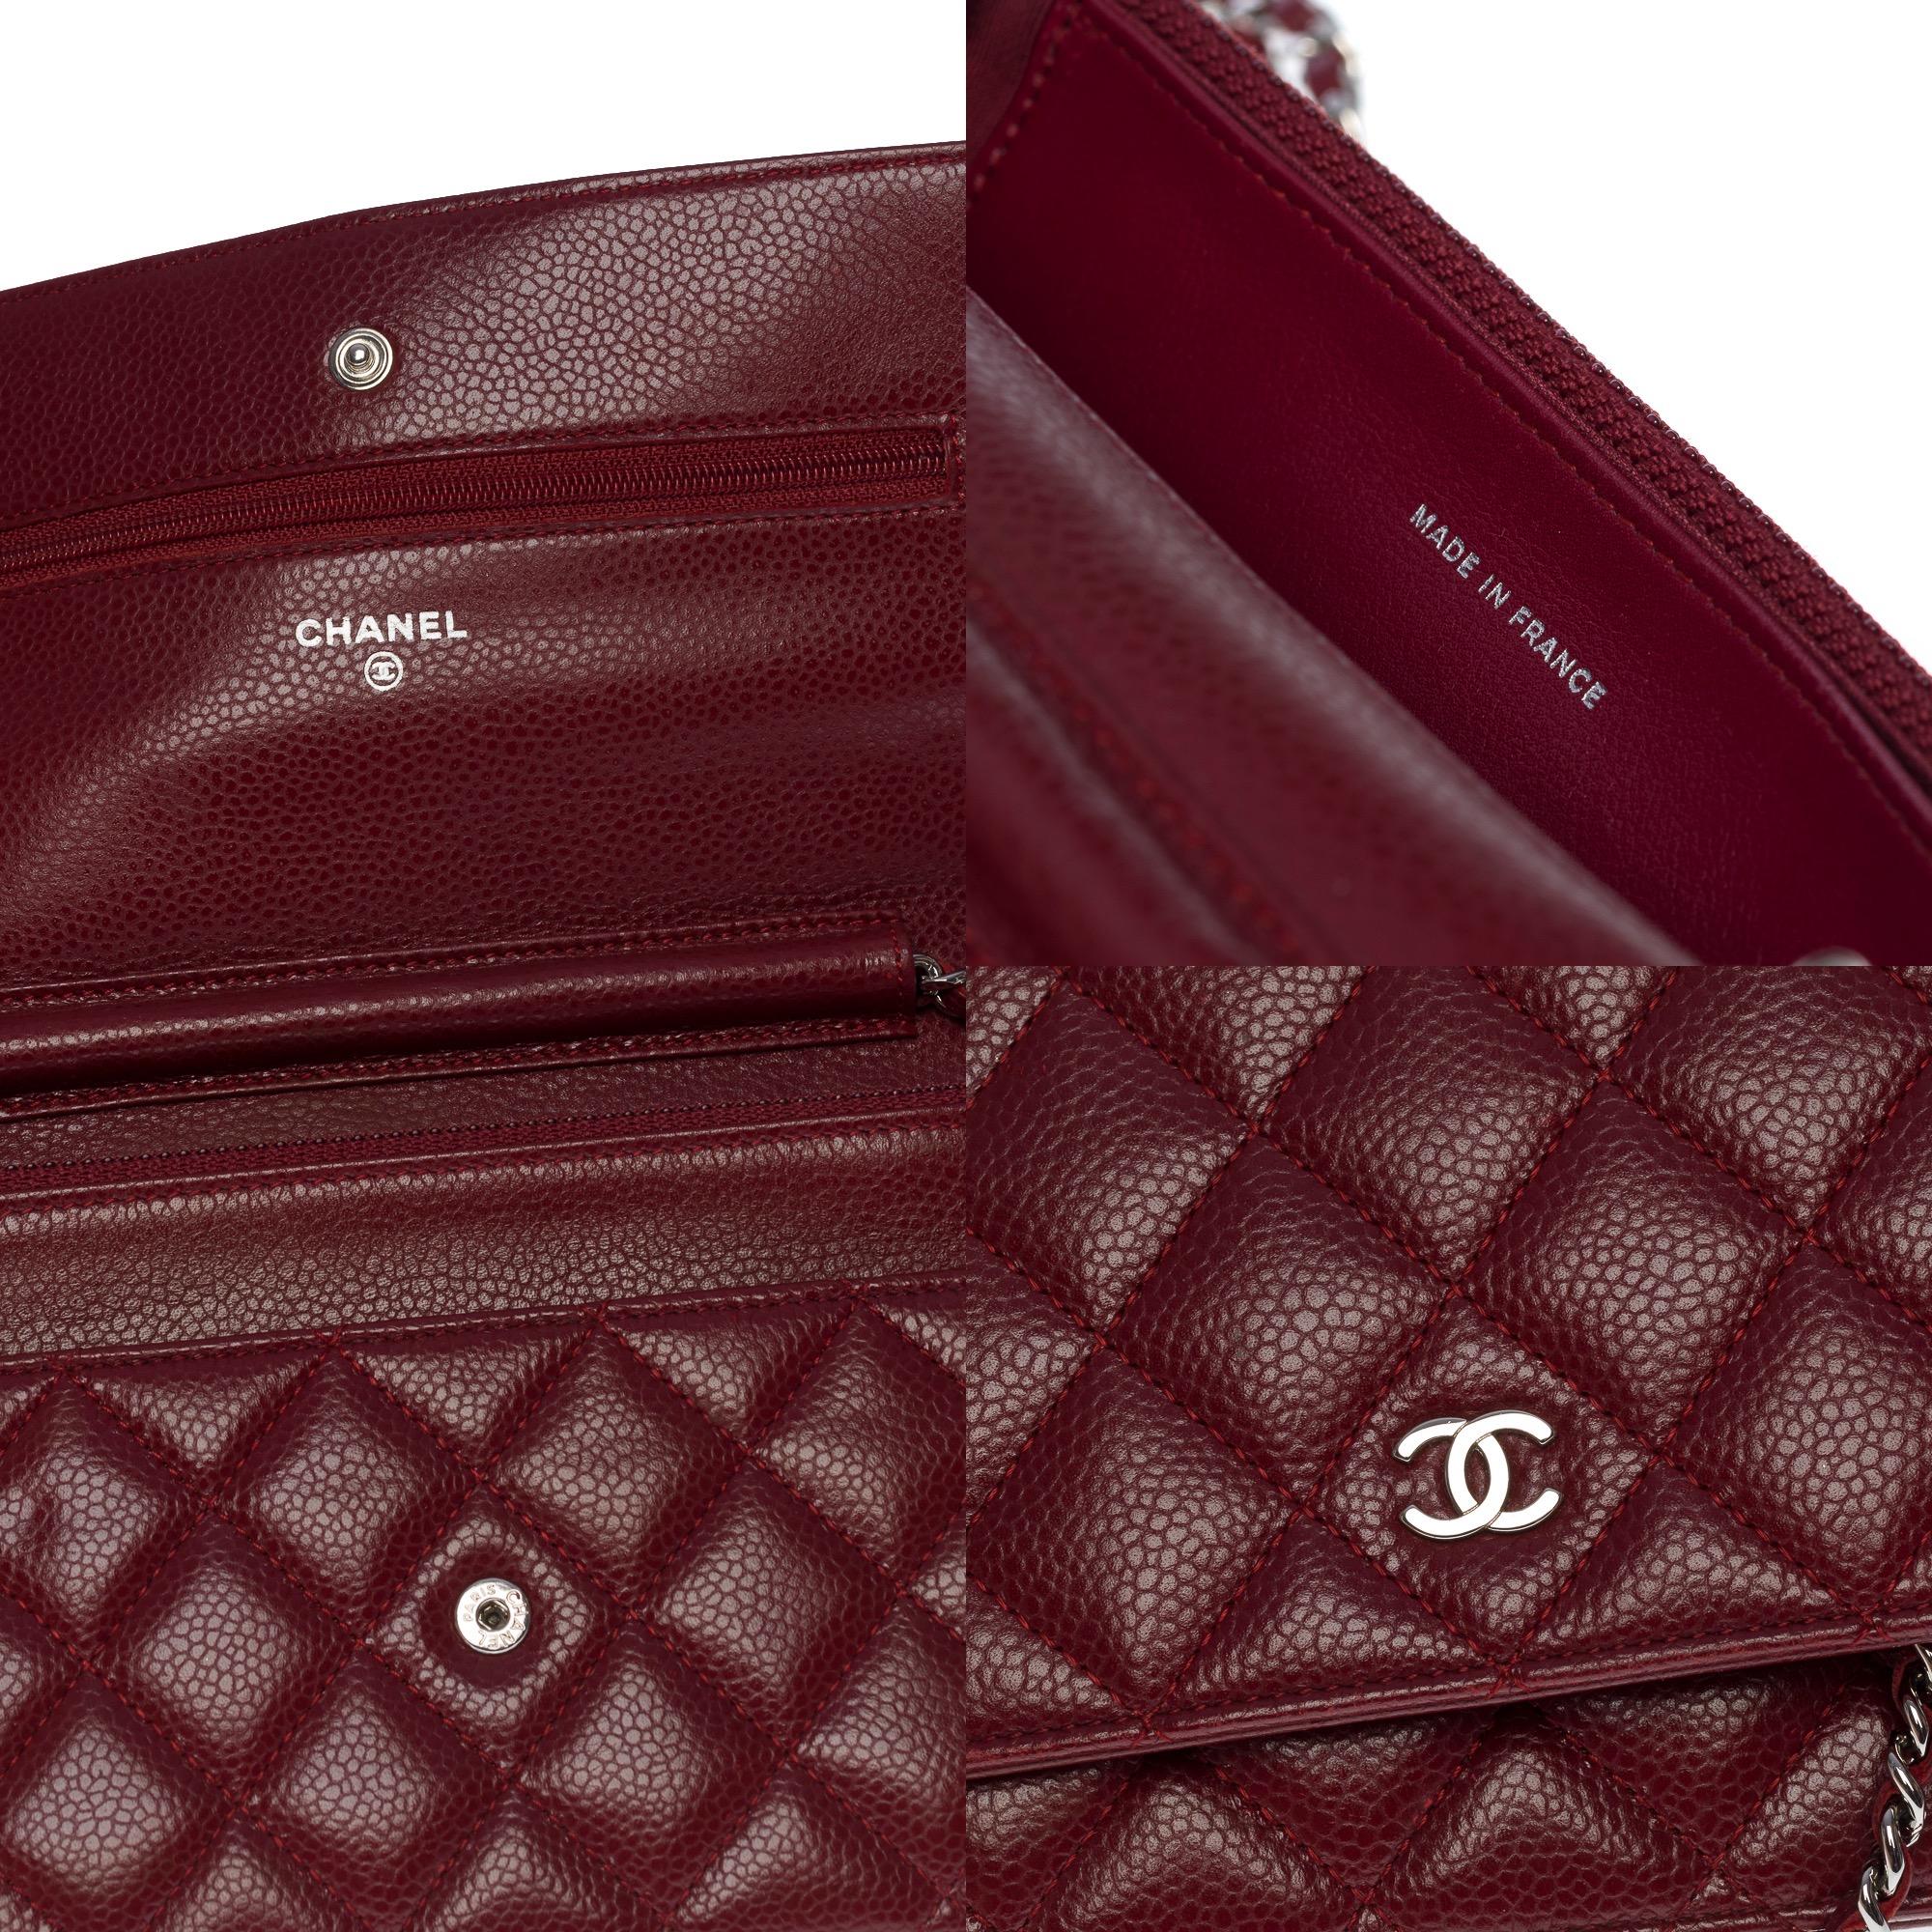 Chanel Wallet On Chain handbag in burgundy quilted caviar leather, SHW 2